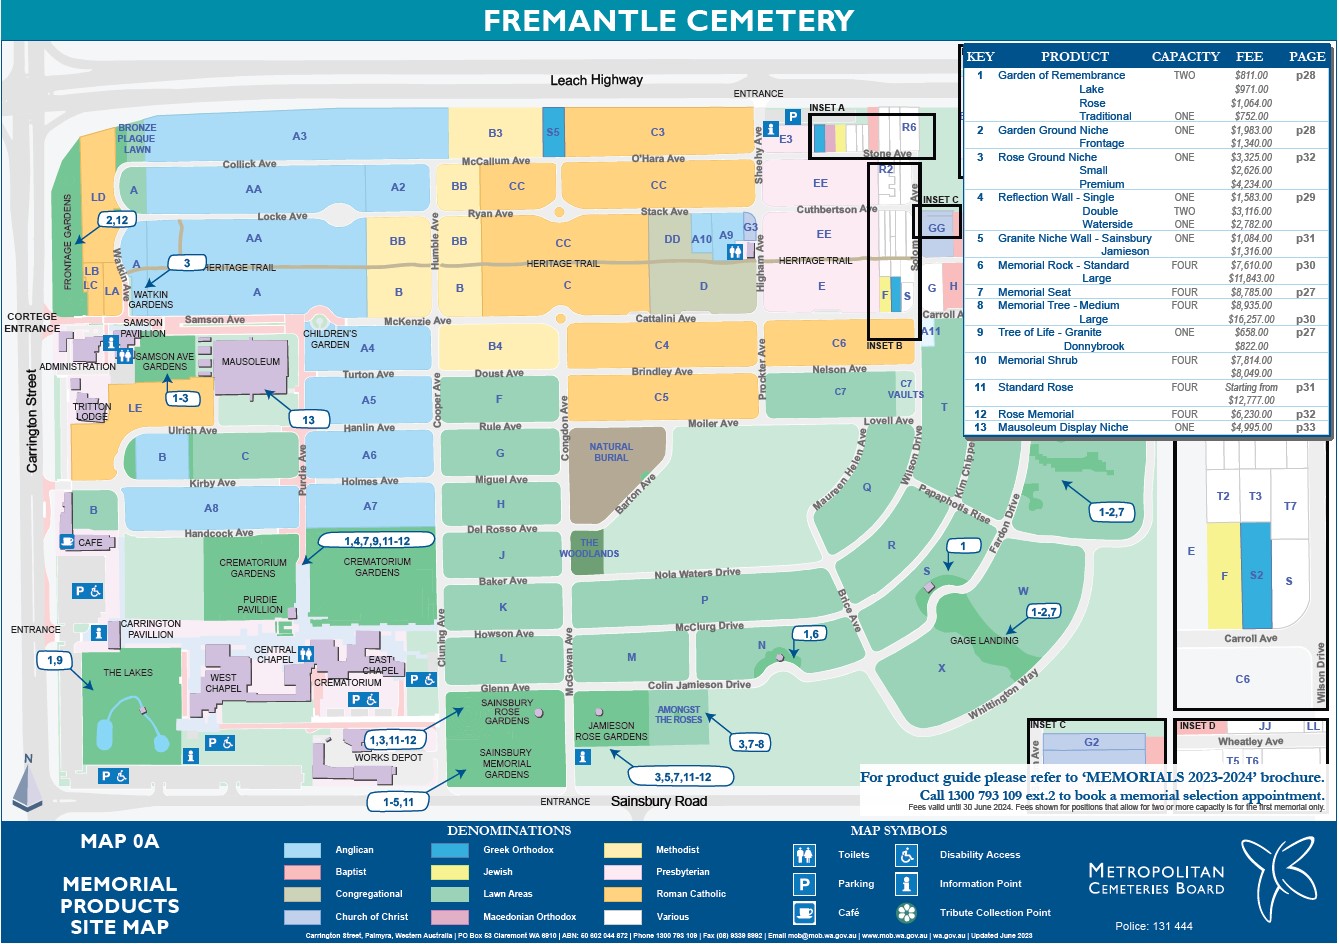 Fremantle Map showing the memorial products available in each section